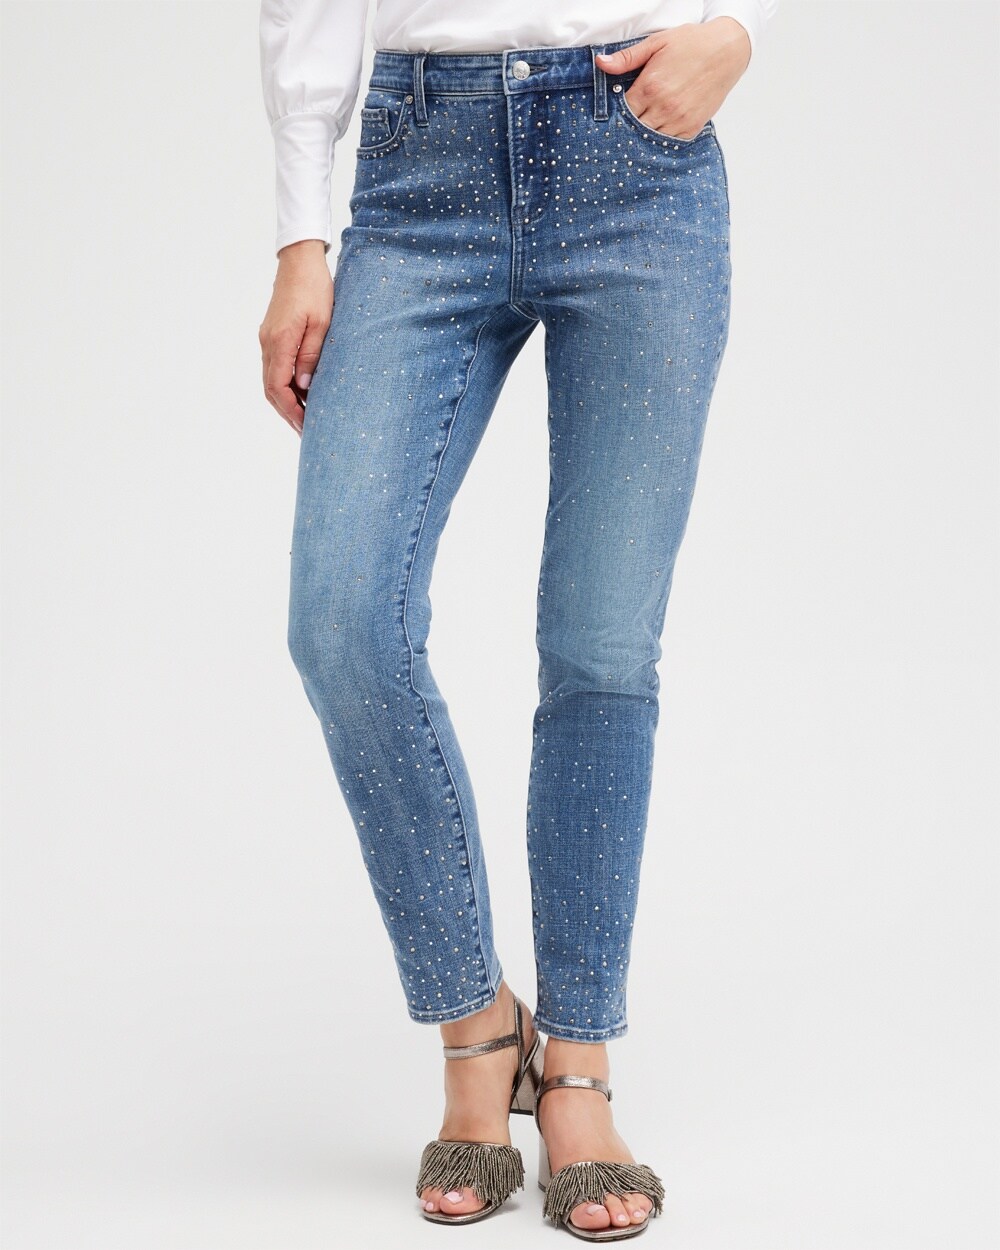 Petite Girlfriend Scattered Stone Ankle Jeans